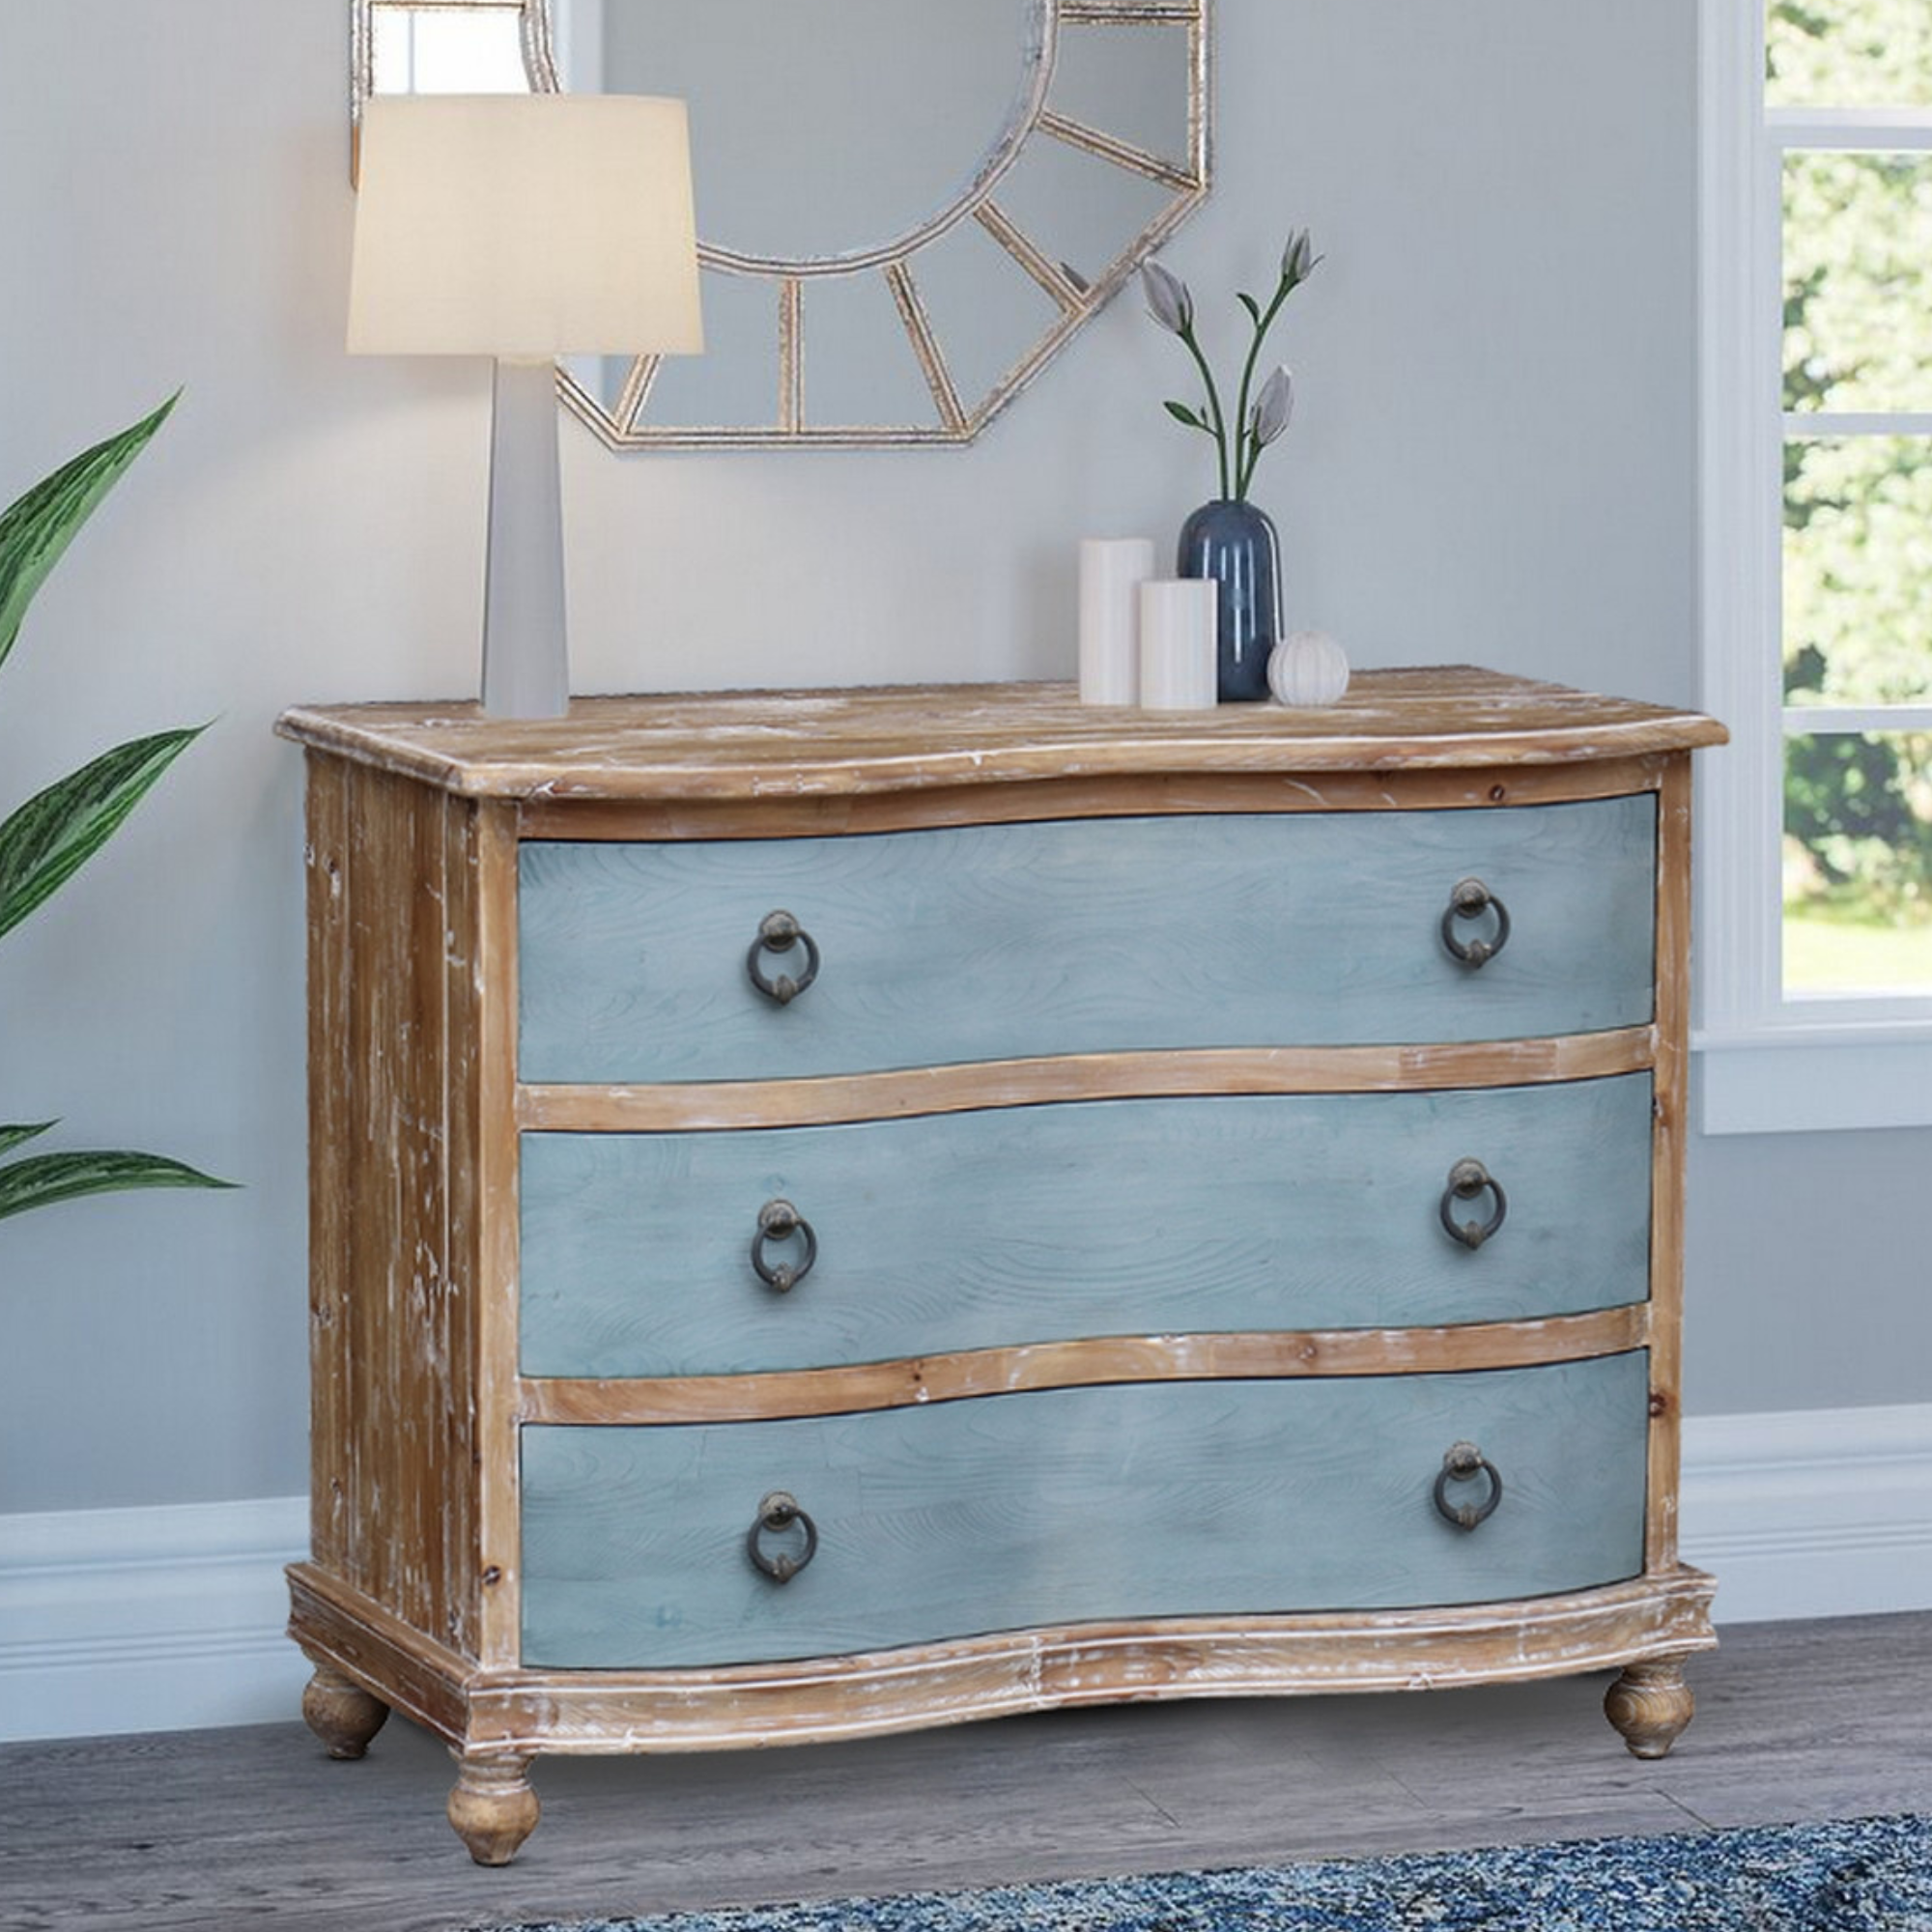 SEASALT BLUE FRENCH COUNTRY CHEST